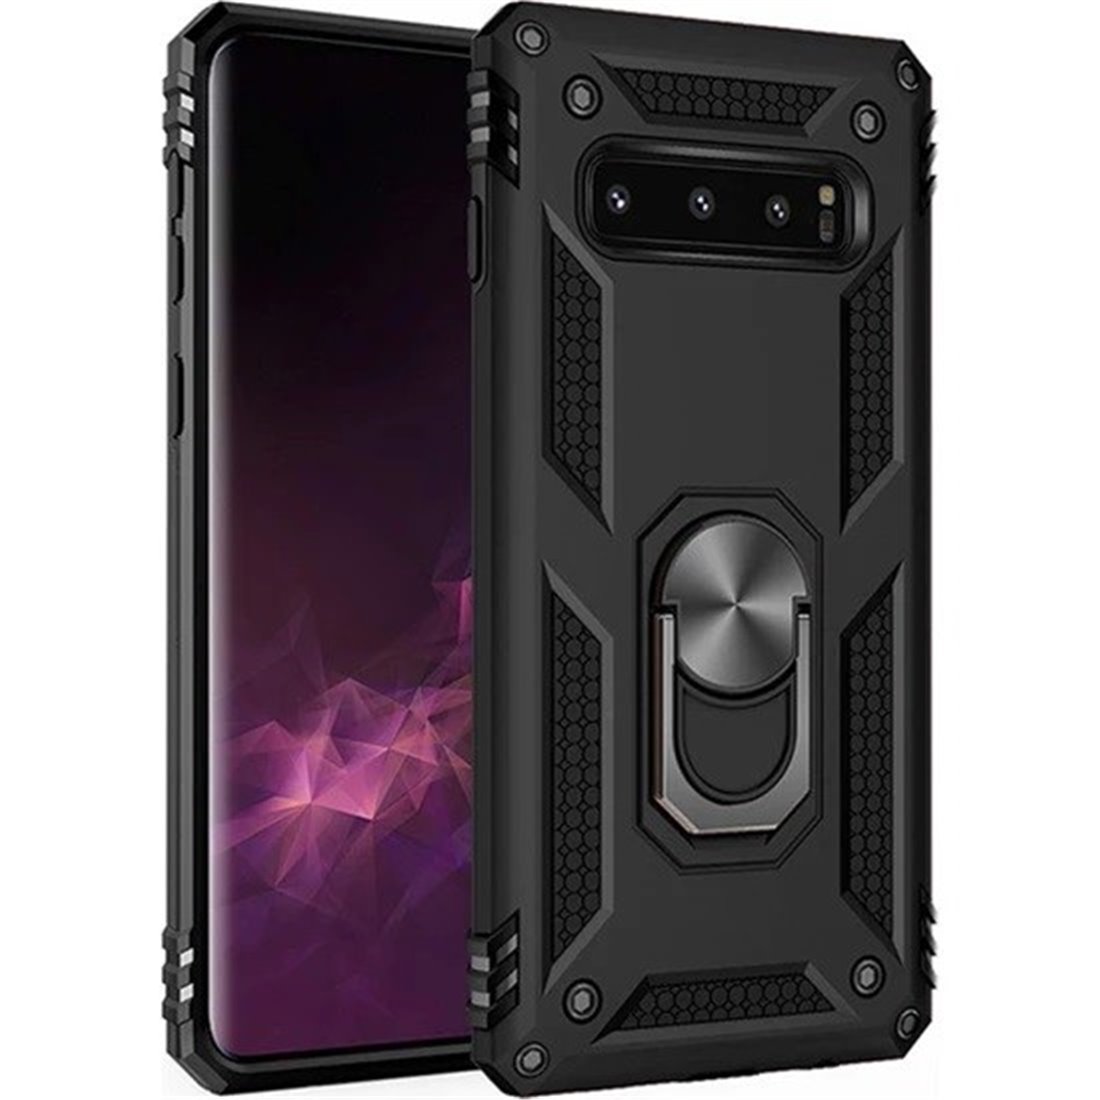 Samsung Galaxy S10 Plastic Black Back Cover - Solid ring